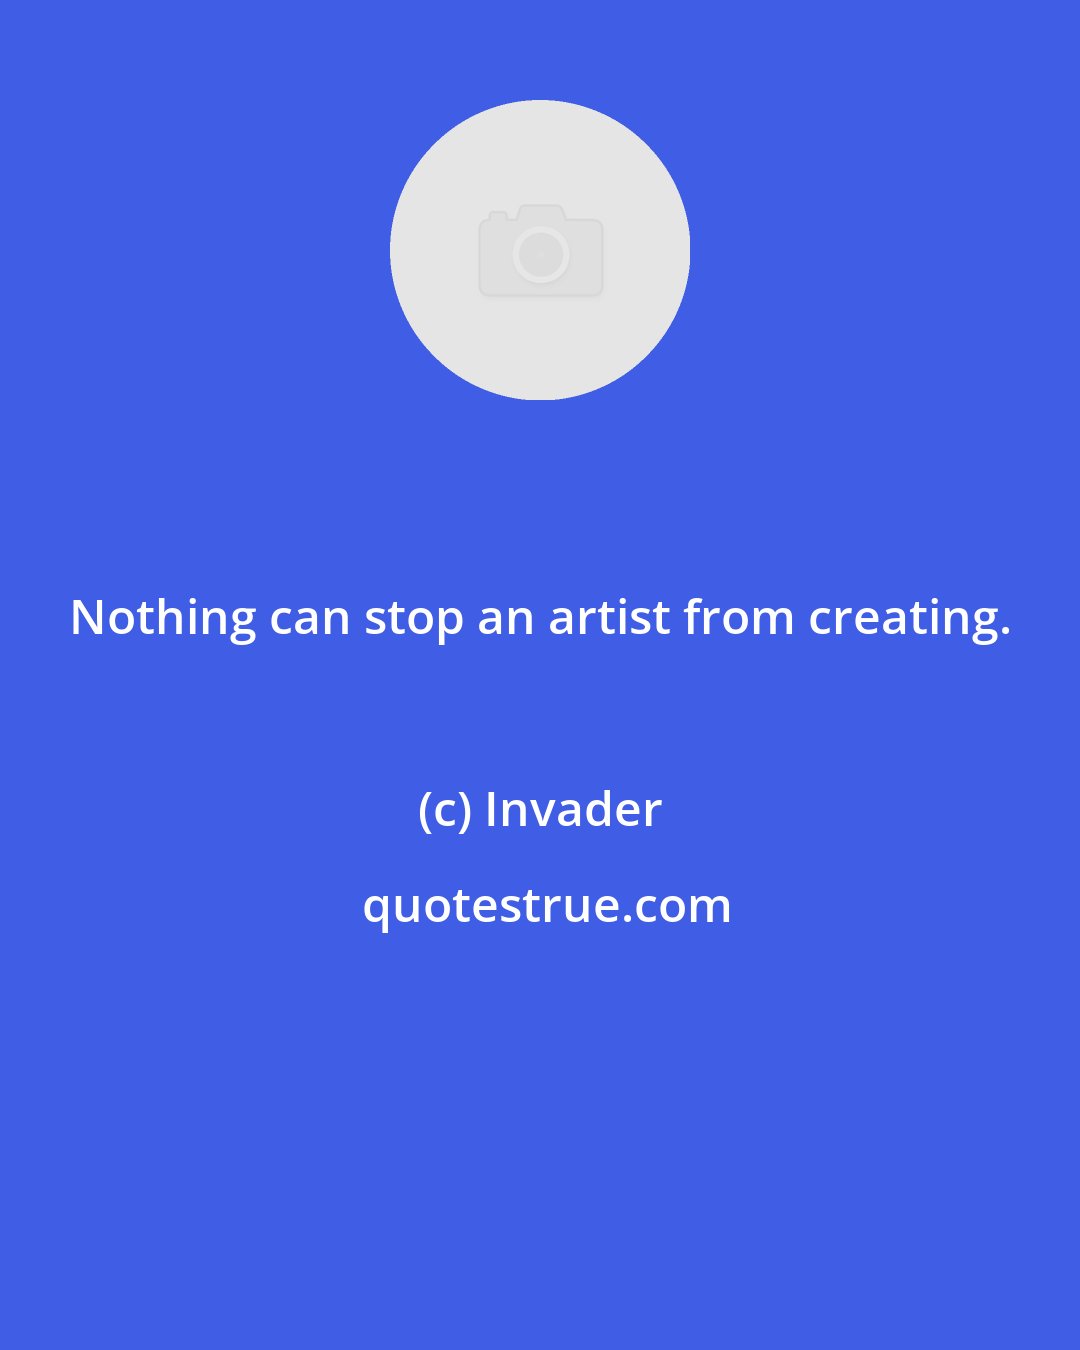 Invader: Nothing can stop an artist from creating.